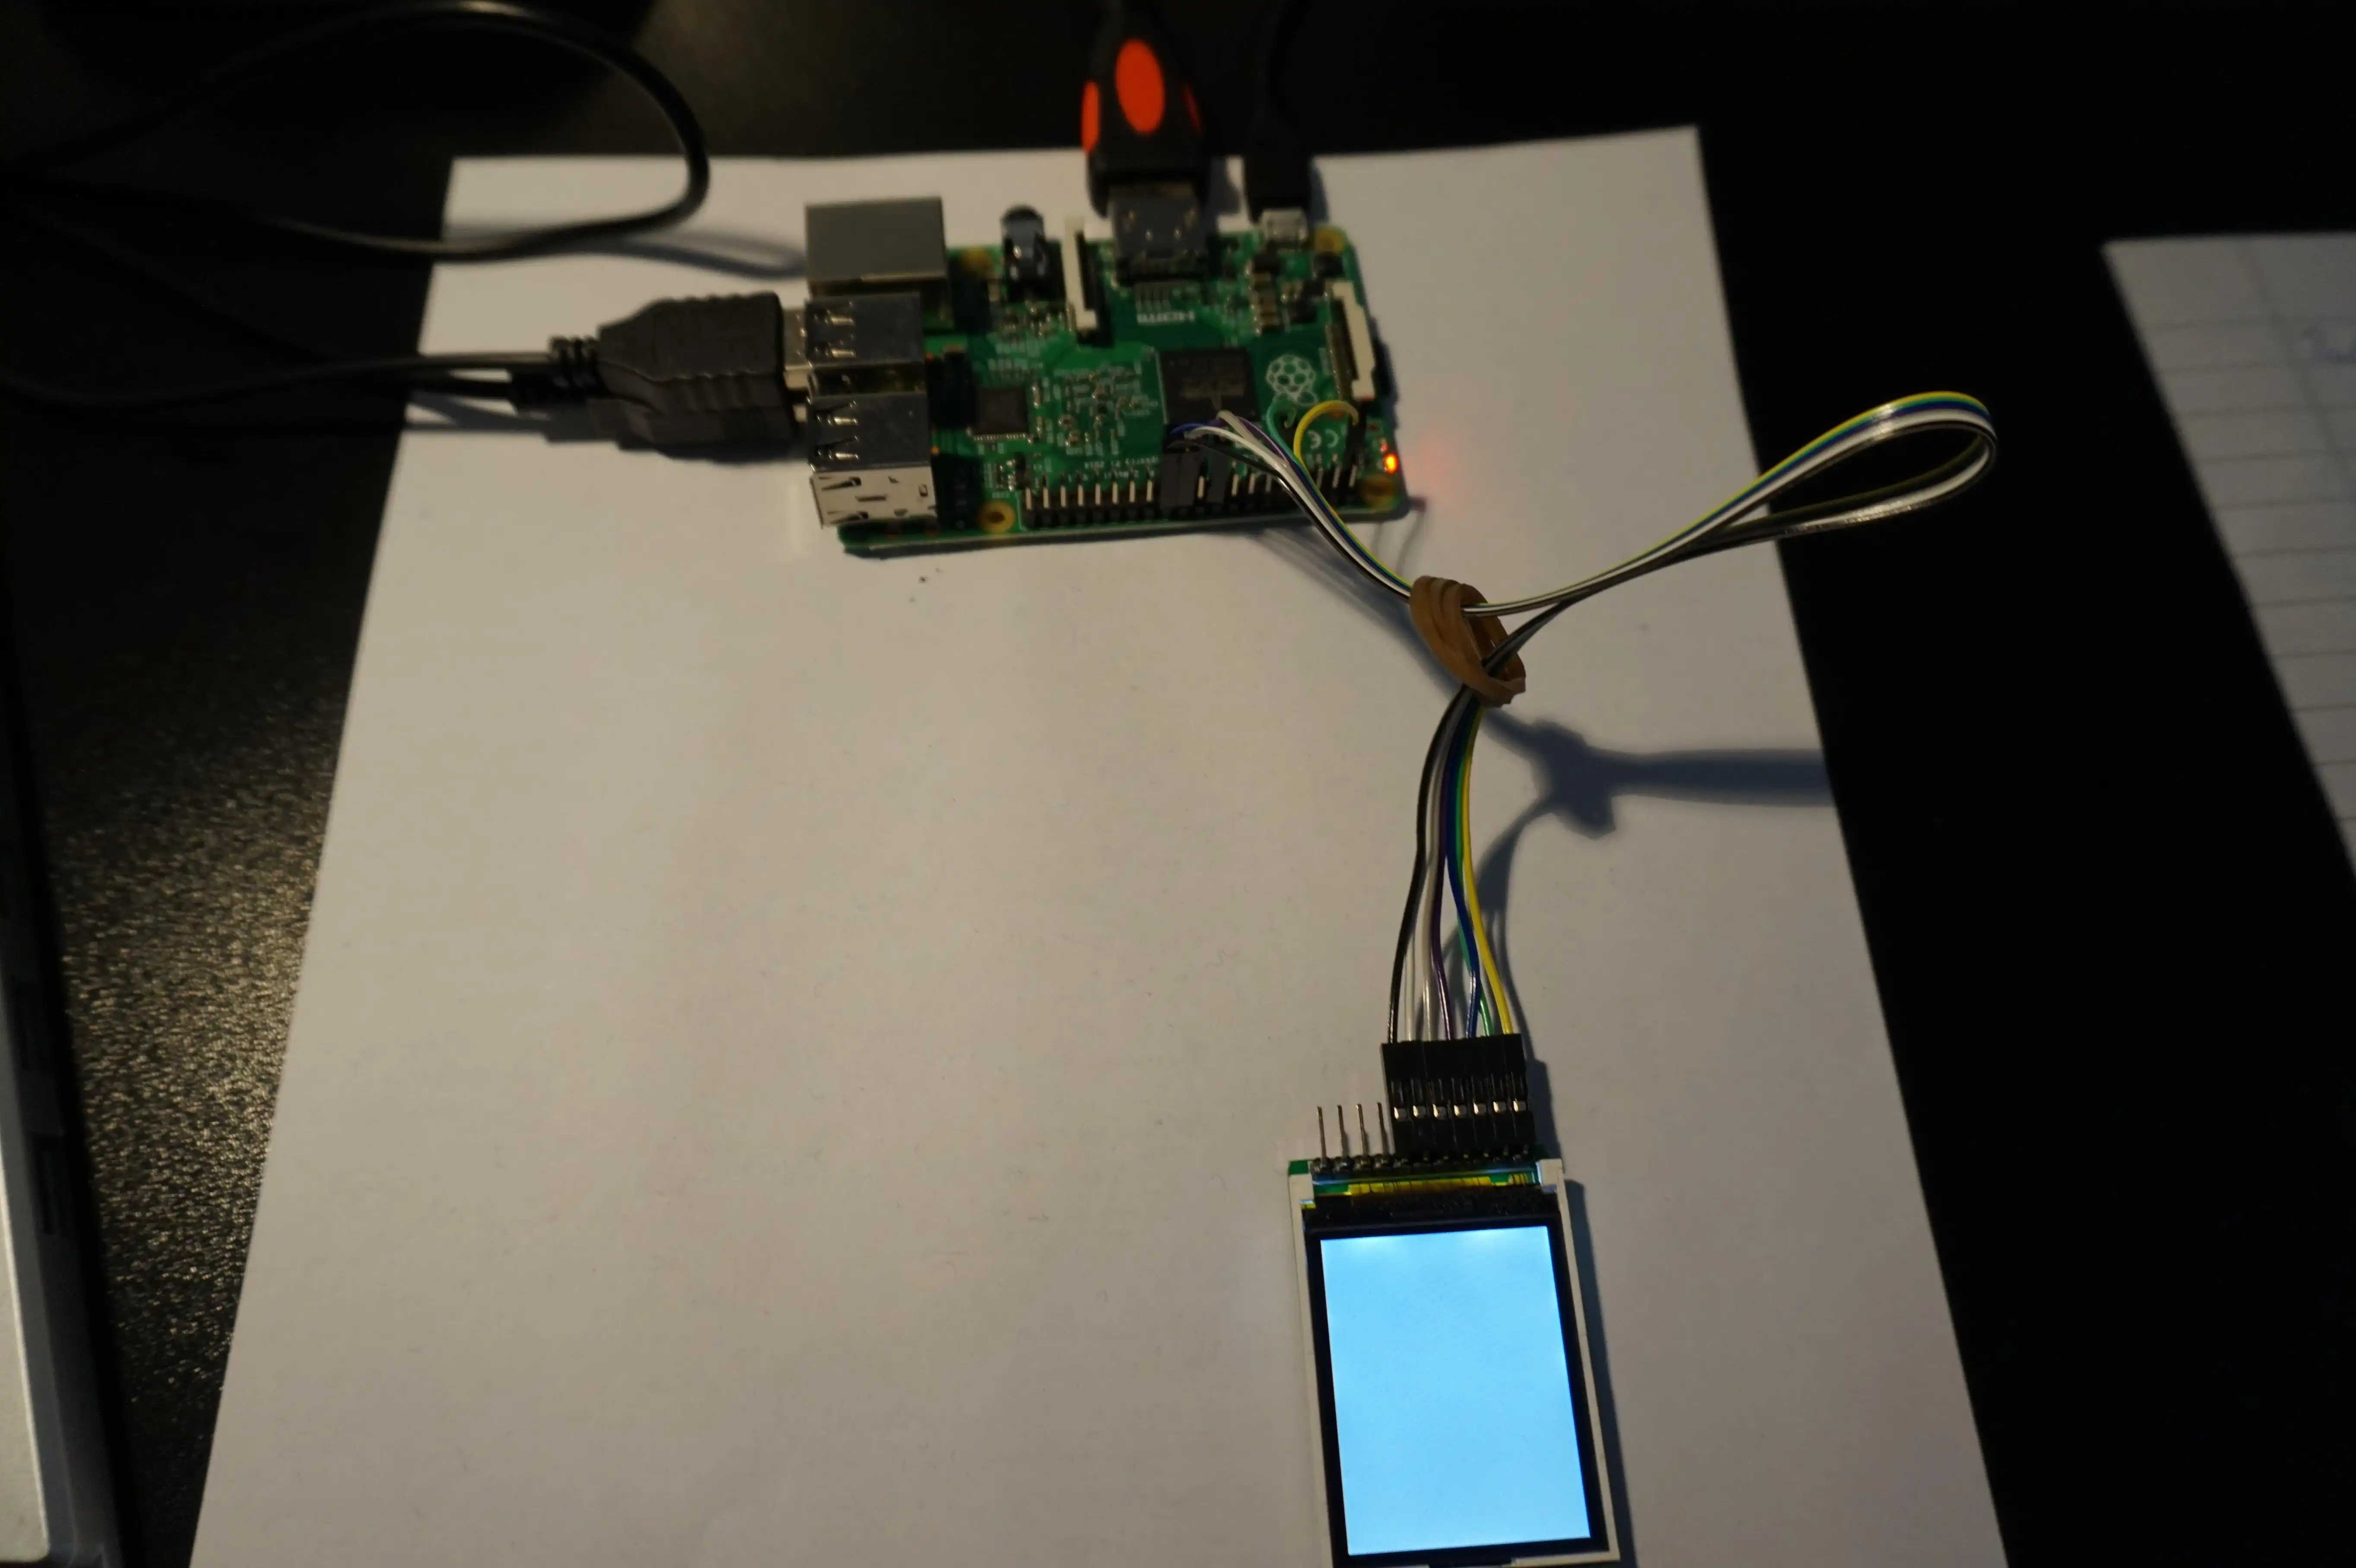 Download web tool or web app Raspberry PI Graphic